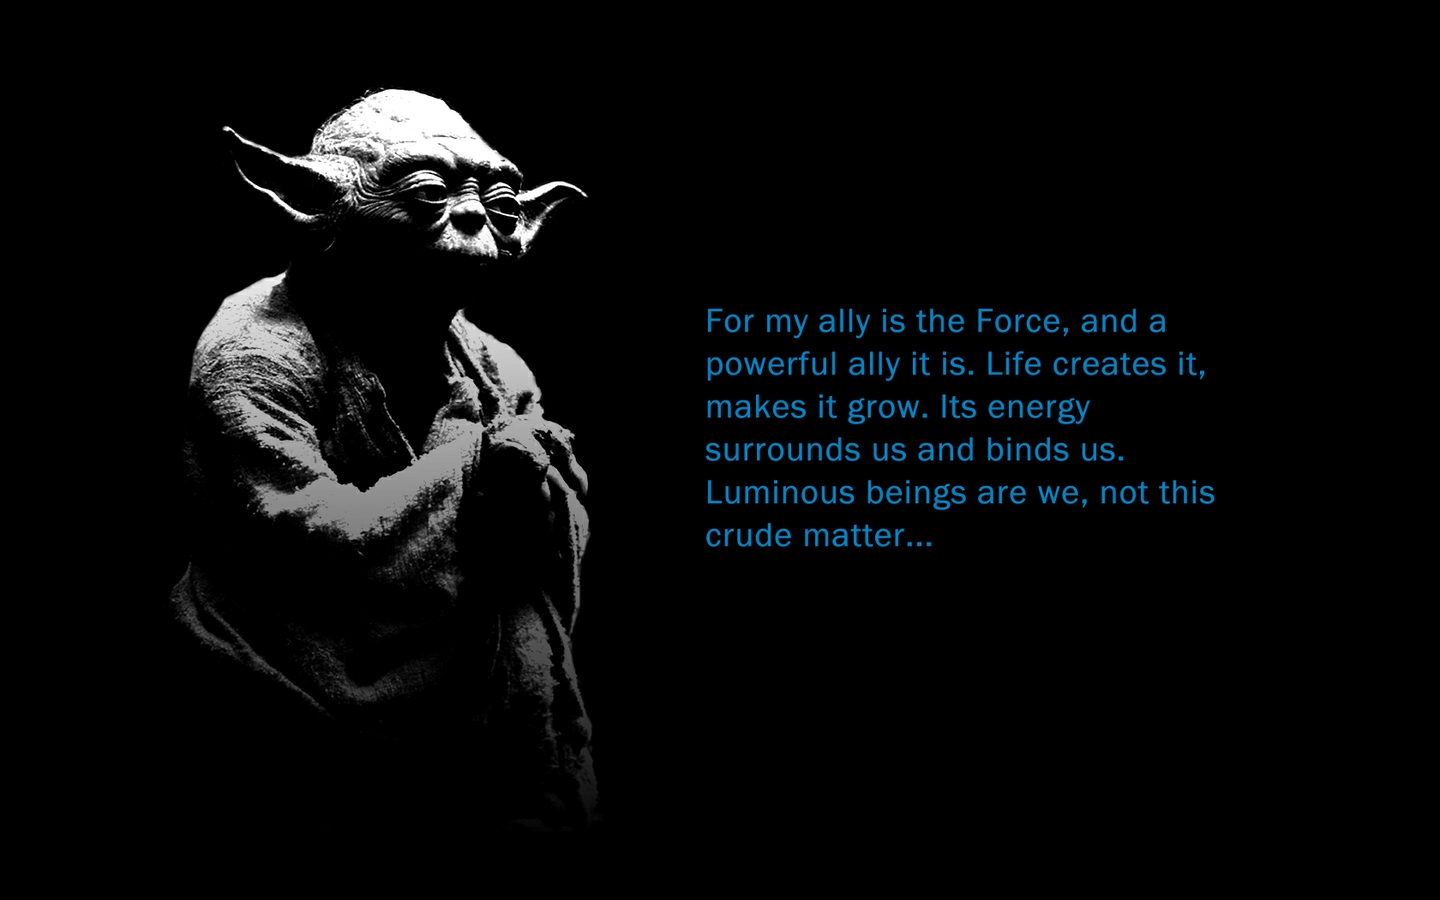 Free download Yoda Famous Quote Wallpaper starwarsforce [1440x900] for your Desktop, Mobile & Tablet. Explore Yoda Wallpaper. Star Wars Yoda Wallpaper, Jedi Master Yoda Wallpaper HD, Yoda Wallpaper for Your Computer